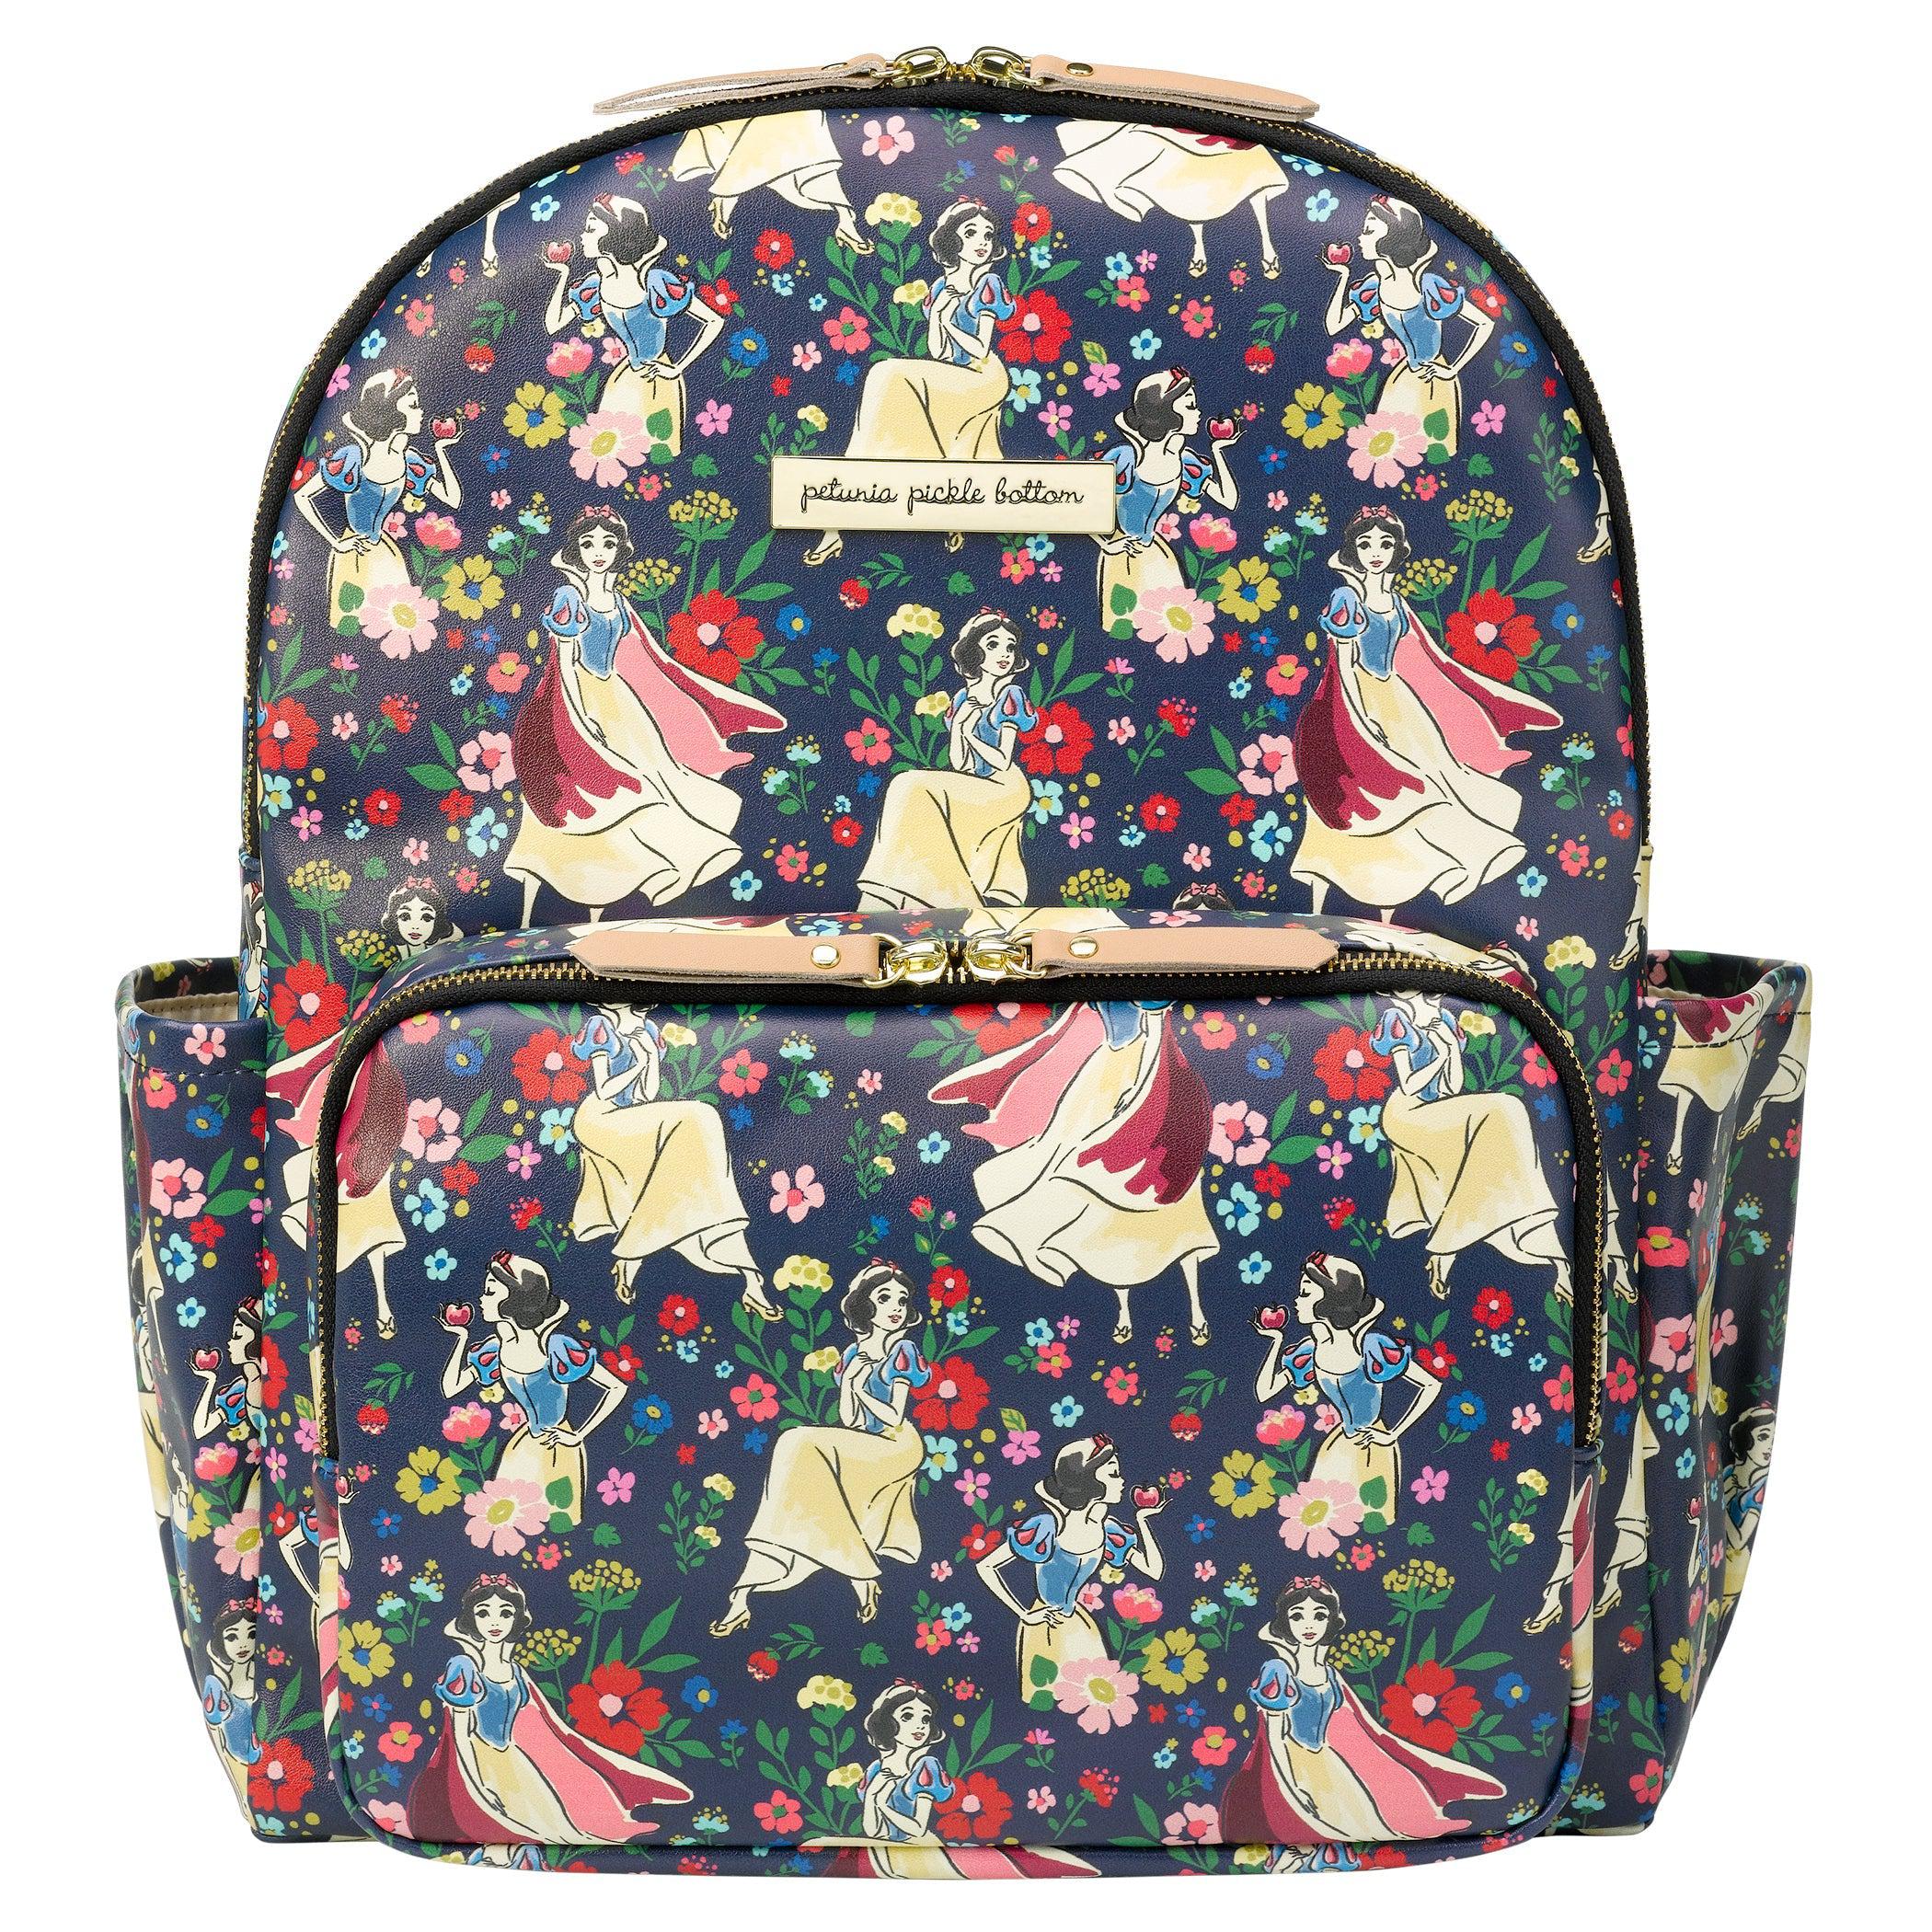 Chemie spoor Voorbereiding District Backpack in Disney's Snow White's Enchanted Forest – Petunia  Pickle Bottom